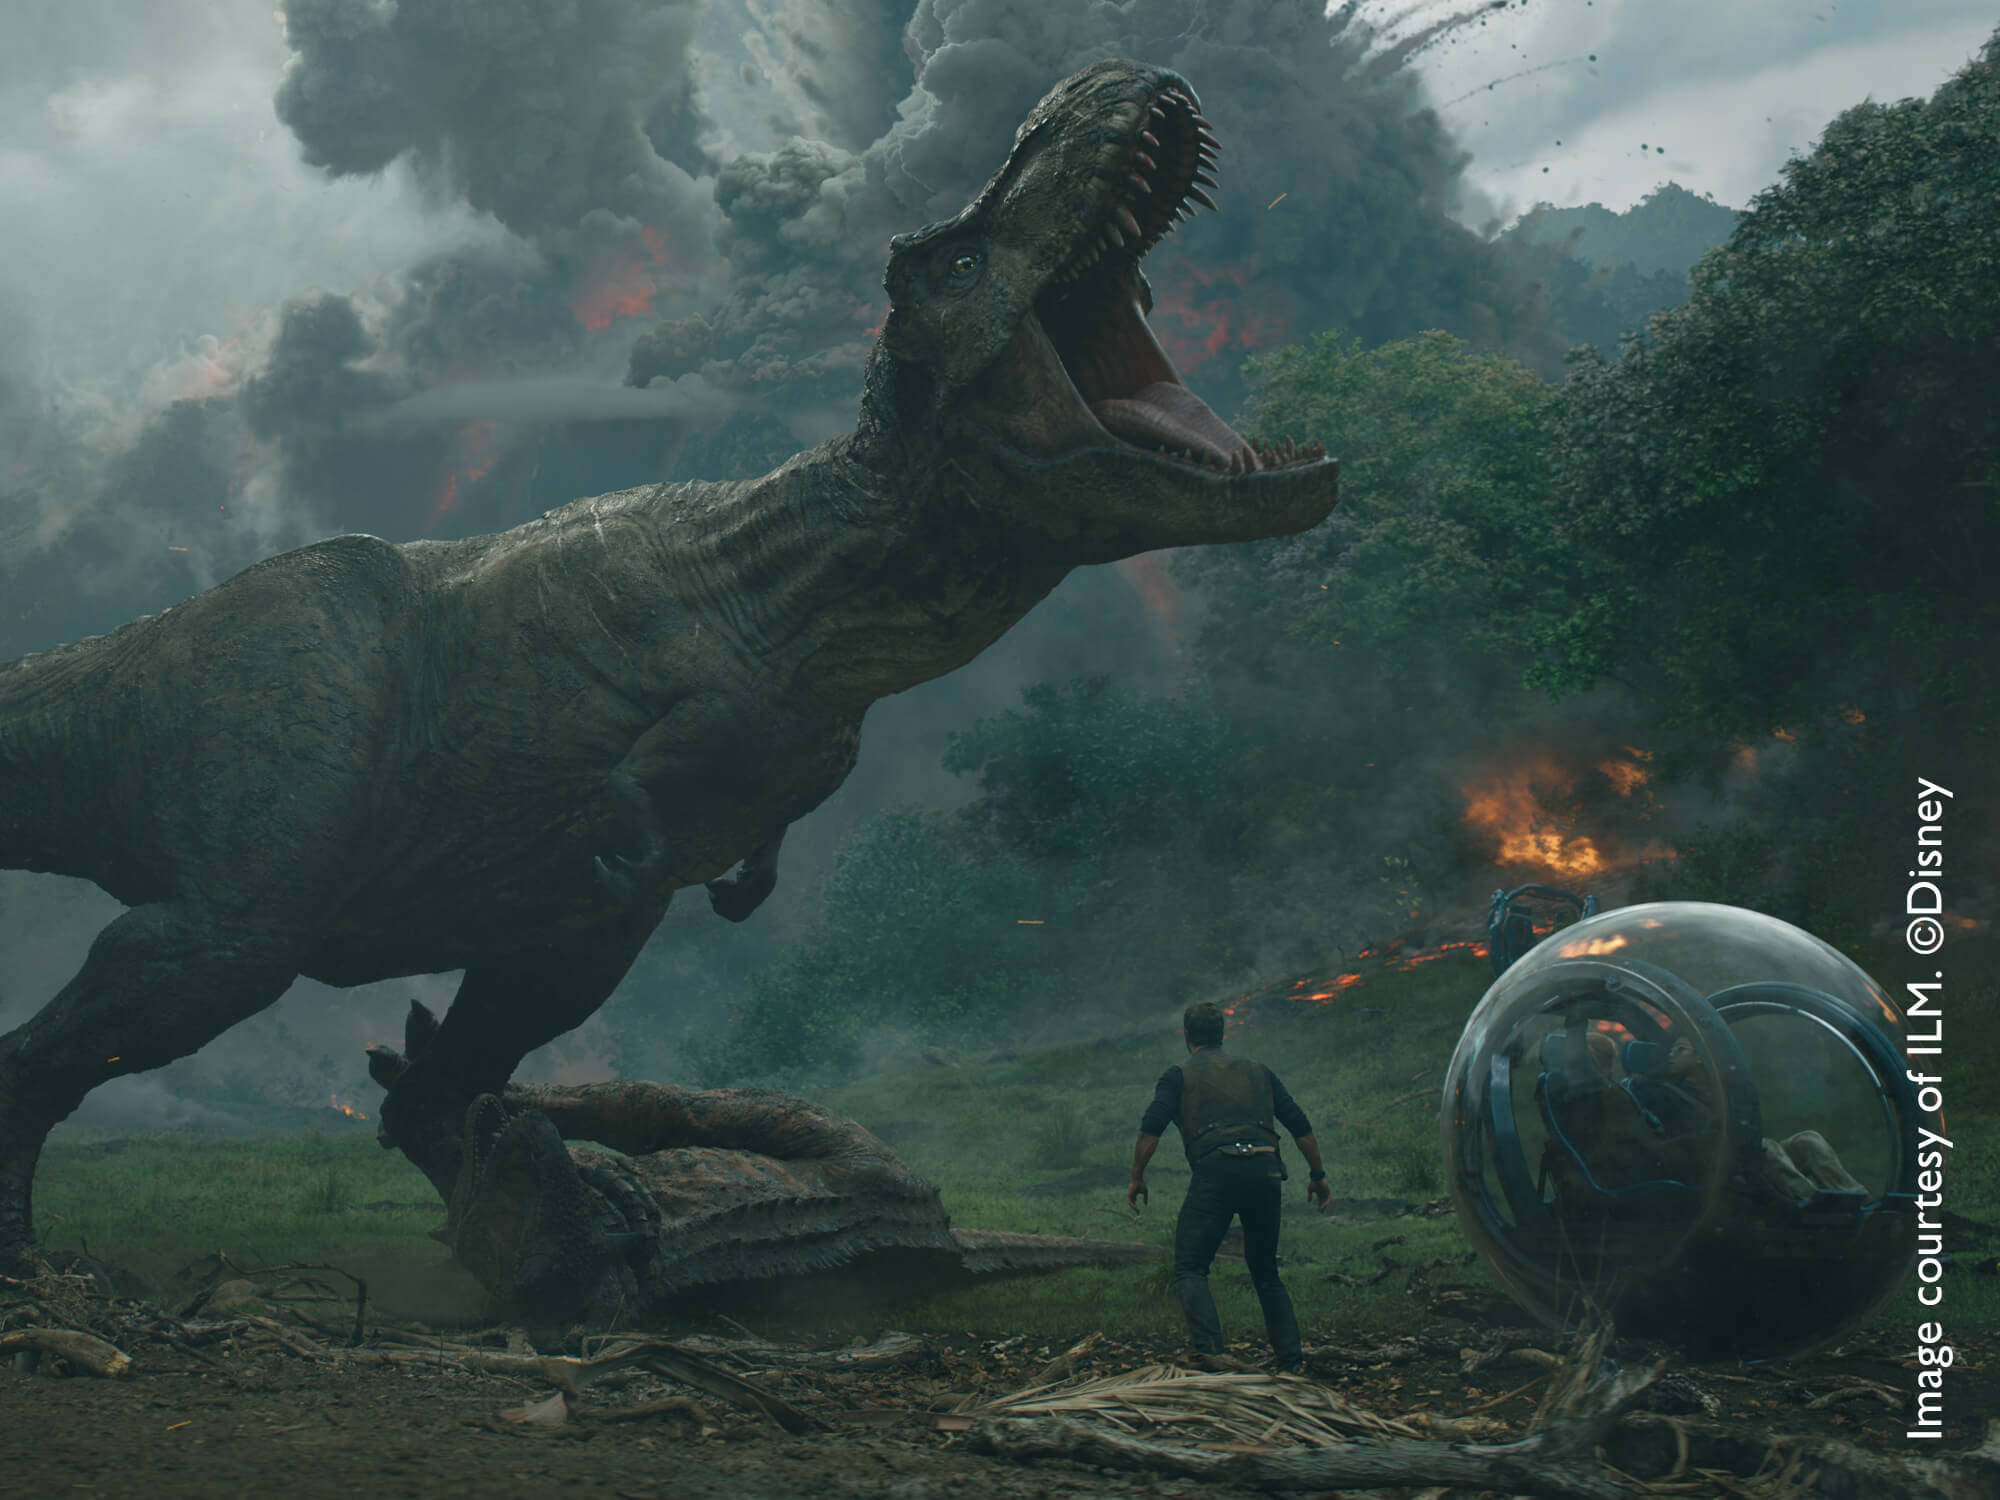 T-Rex with explosion, smoke and fire in the background from Jurassic World film